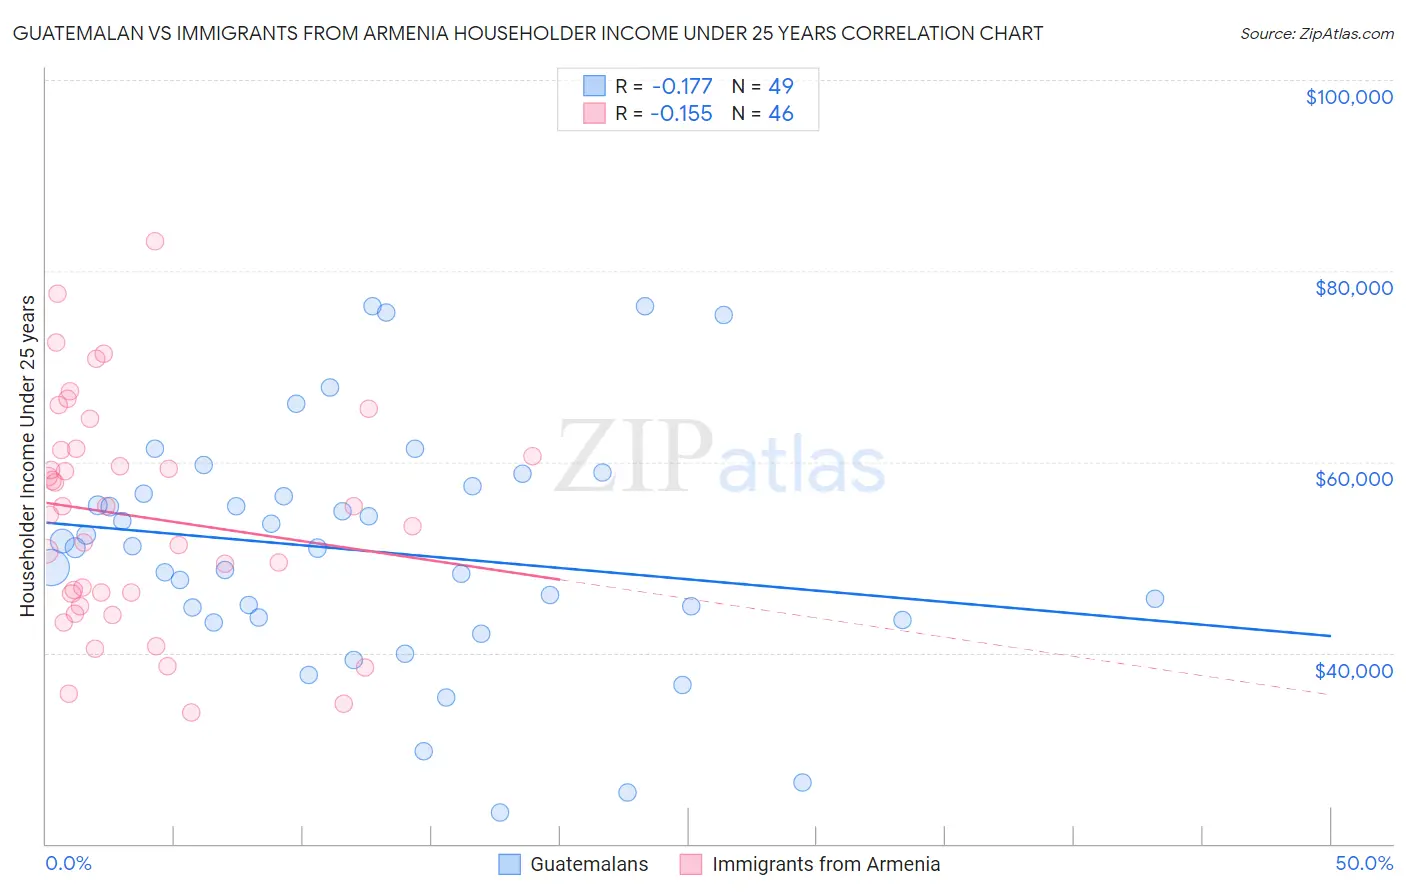 Guatemalan vs Immigrants from Armenia Householder Income Under 25 years